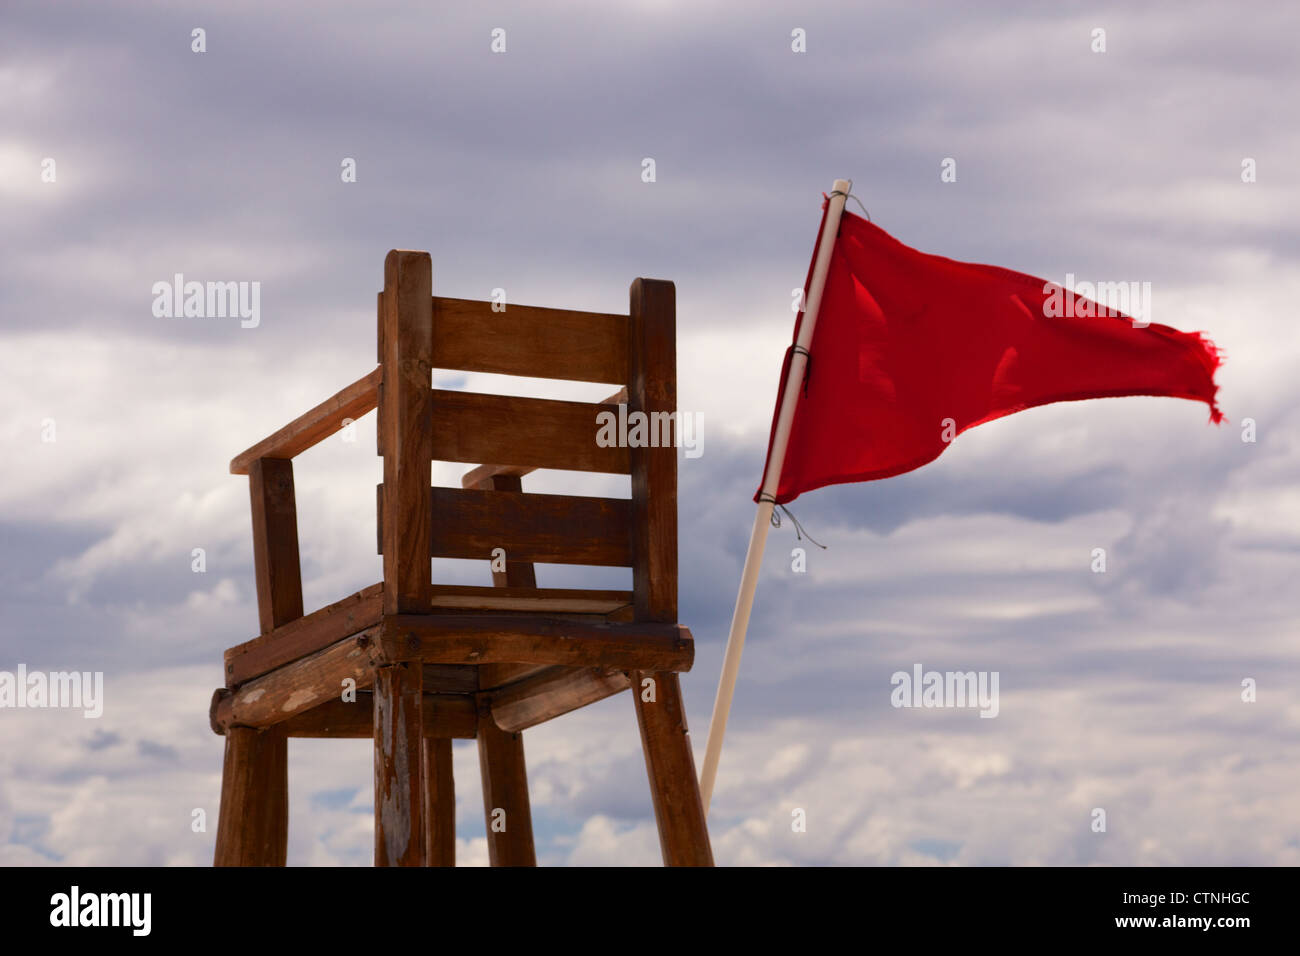 Lifeguard chair sitting empty with a red flag streaming in the wind, showing unsafe conditions for swimming. Stock Photo